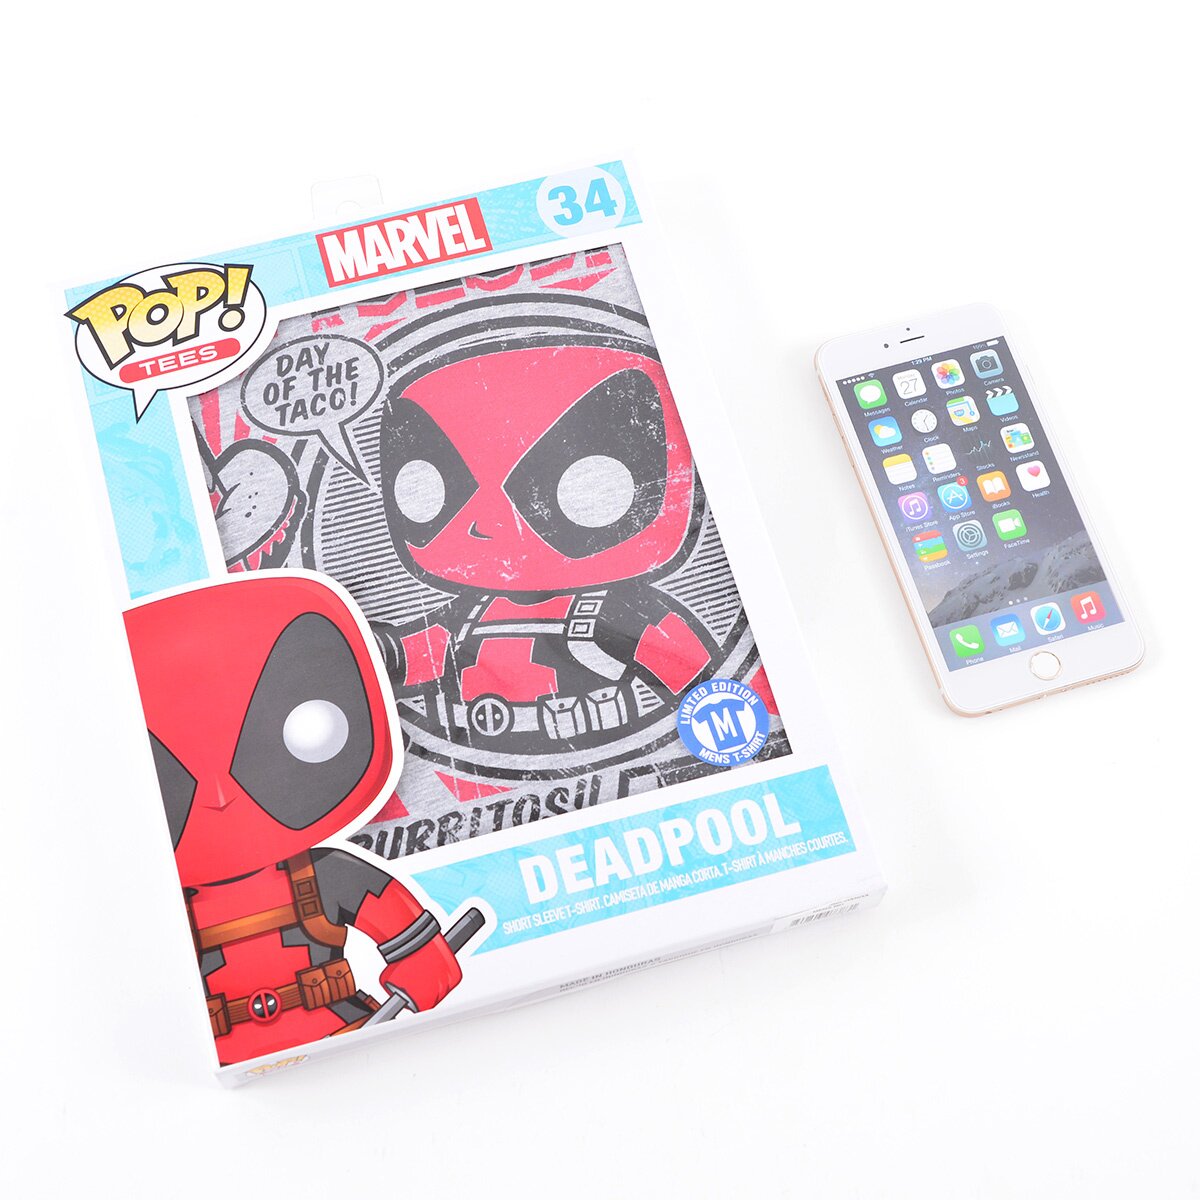 Deadpool For President - Hope and Chimichangas - NeatoShop